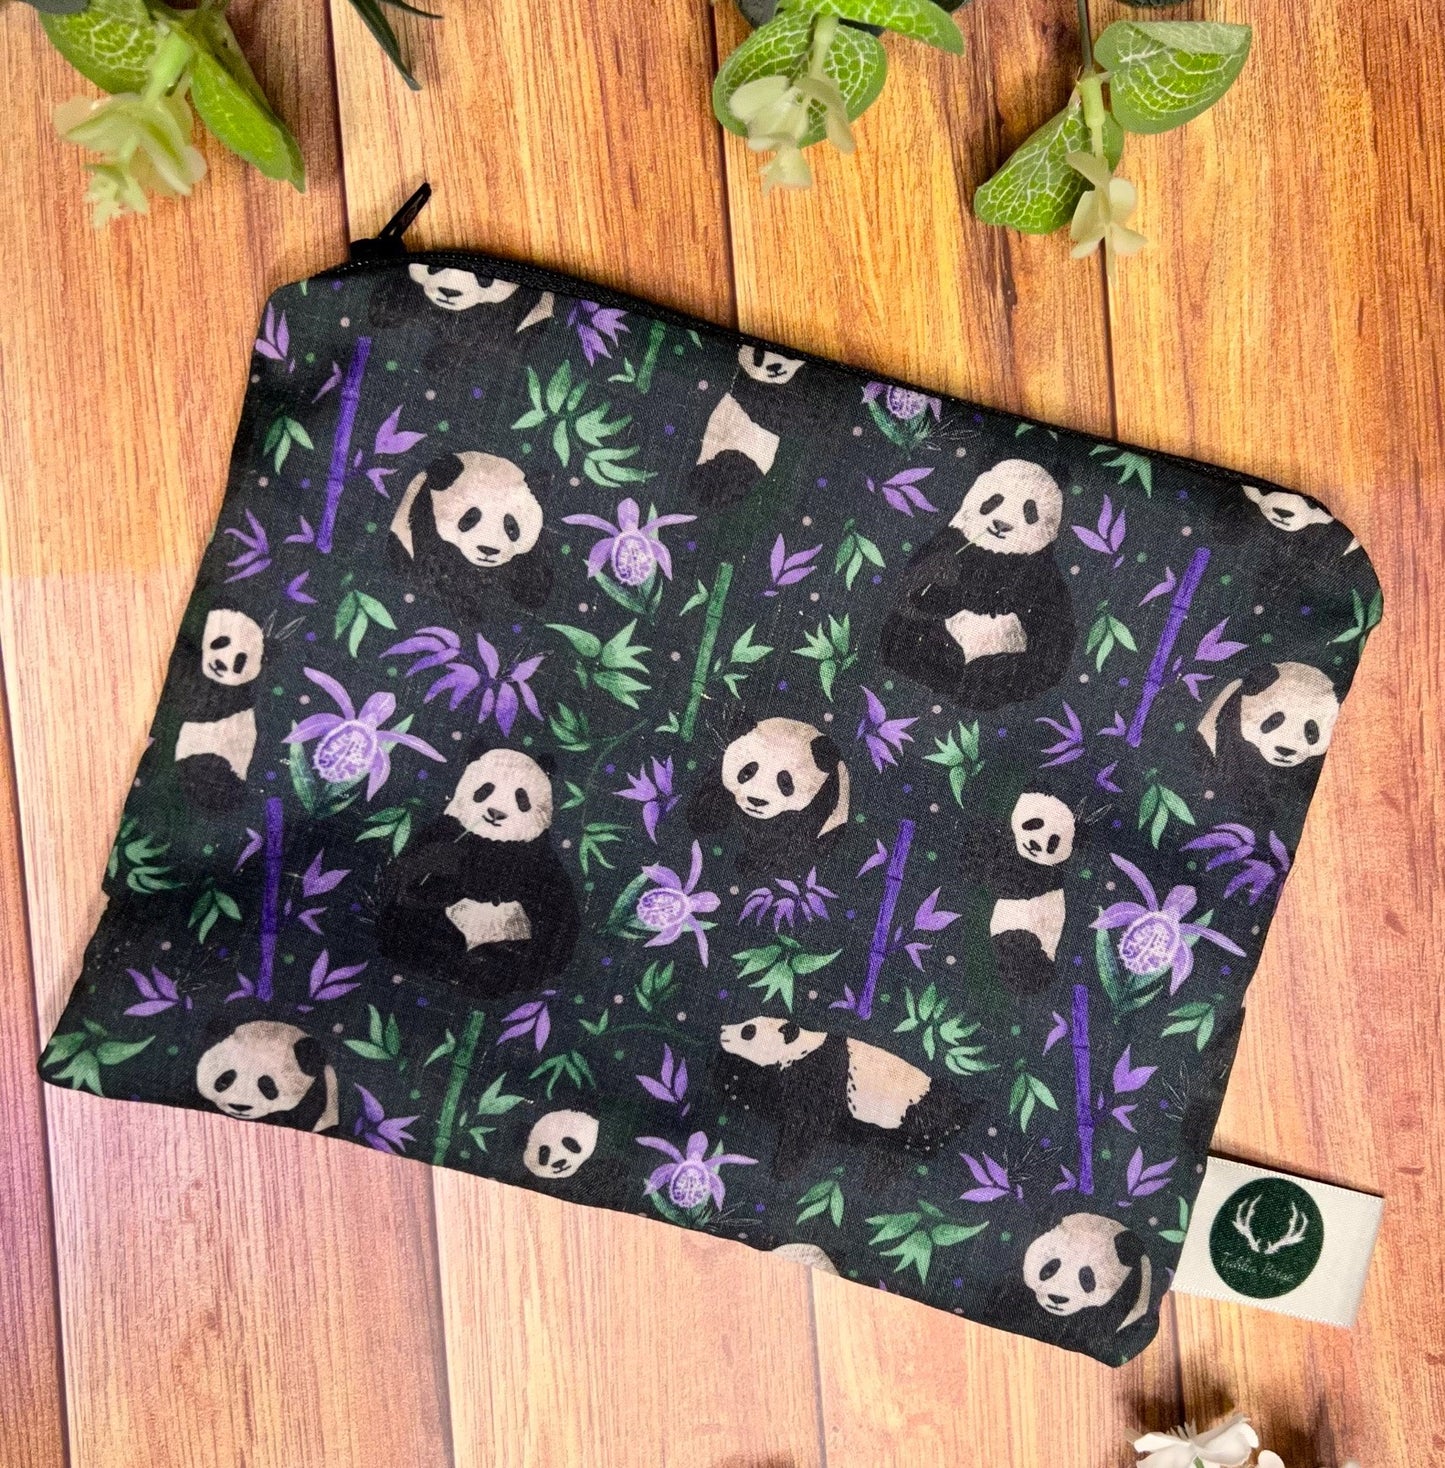 ideal as a present for a panda lover, our panda pouch is great for handbag storage and has a lovely dark surface pattern design on it.